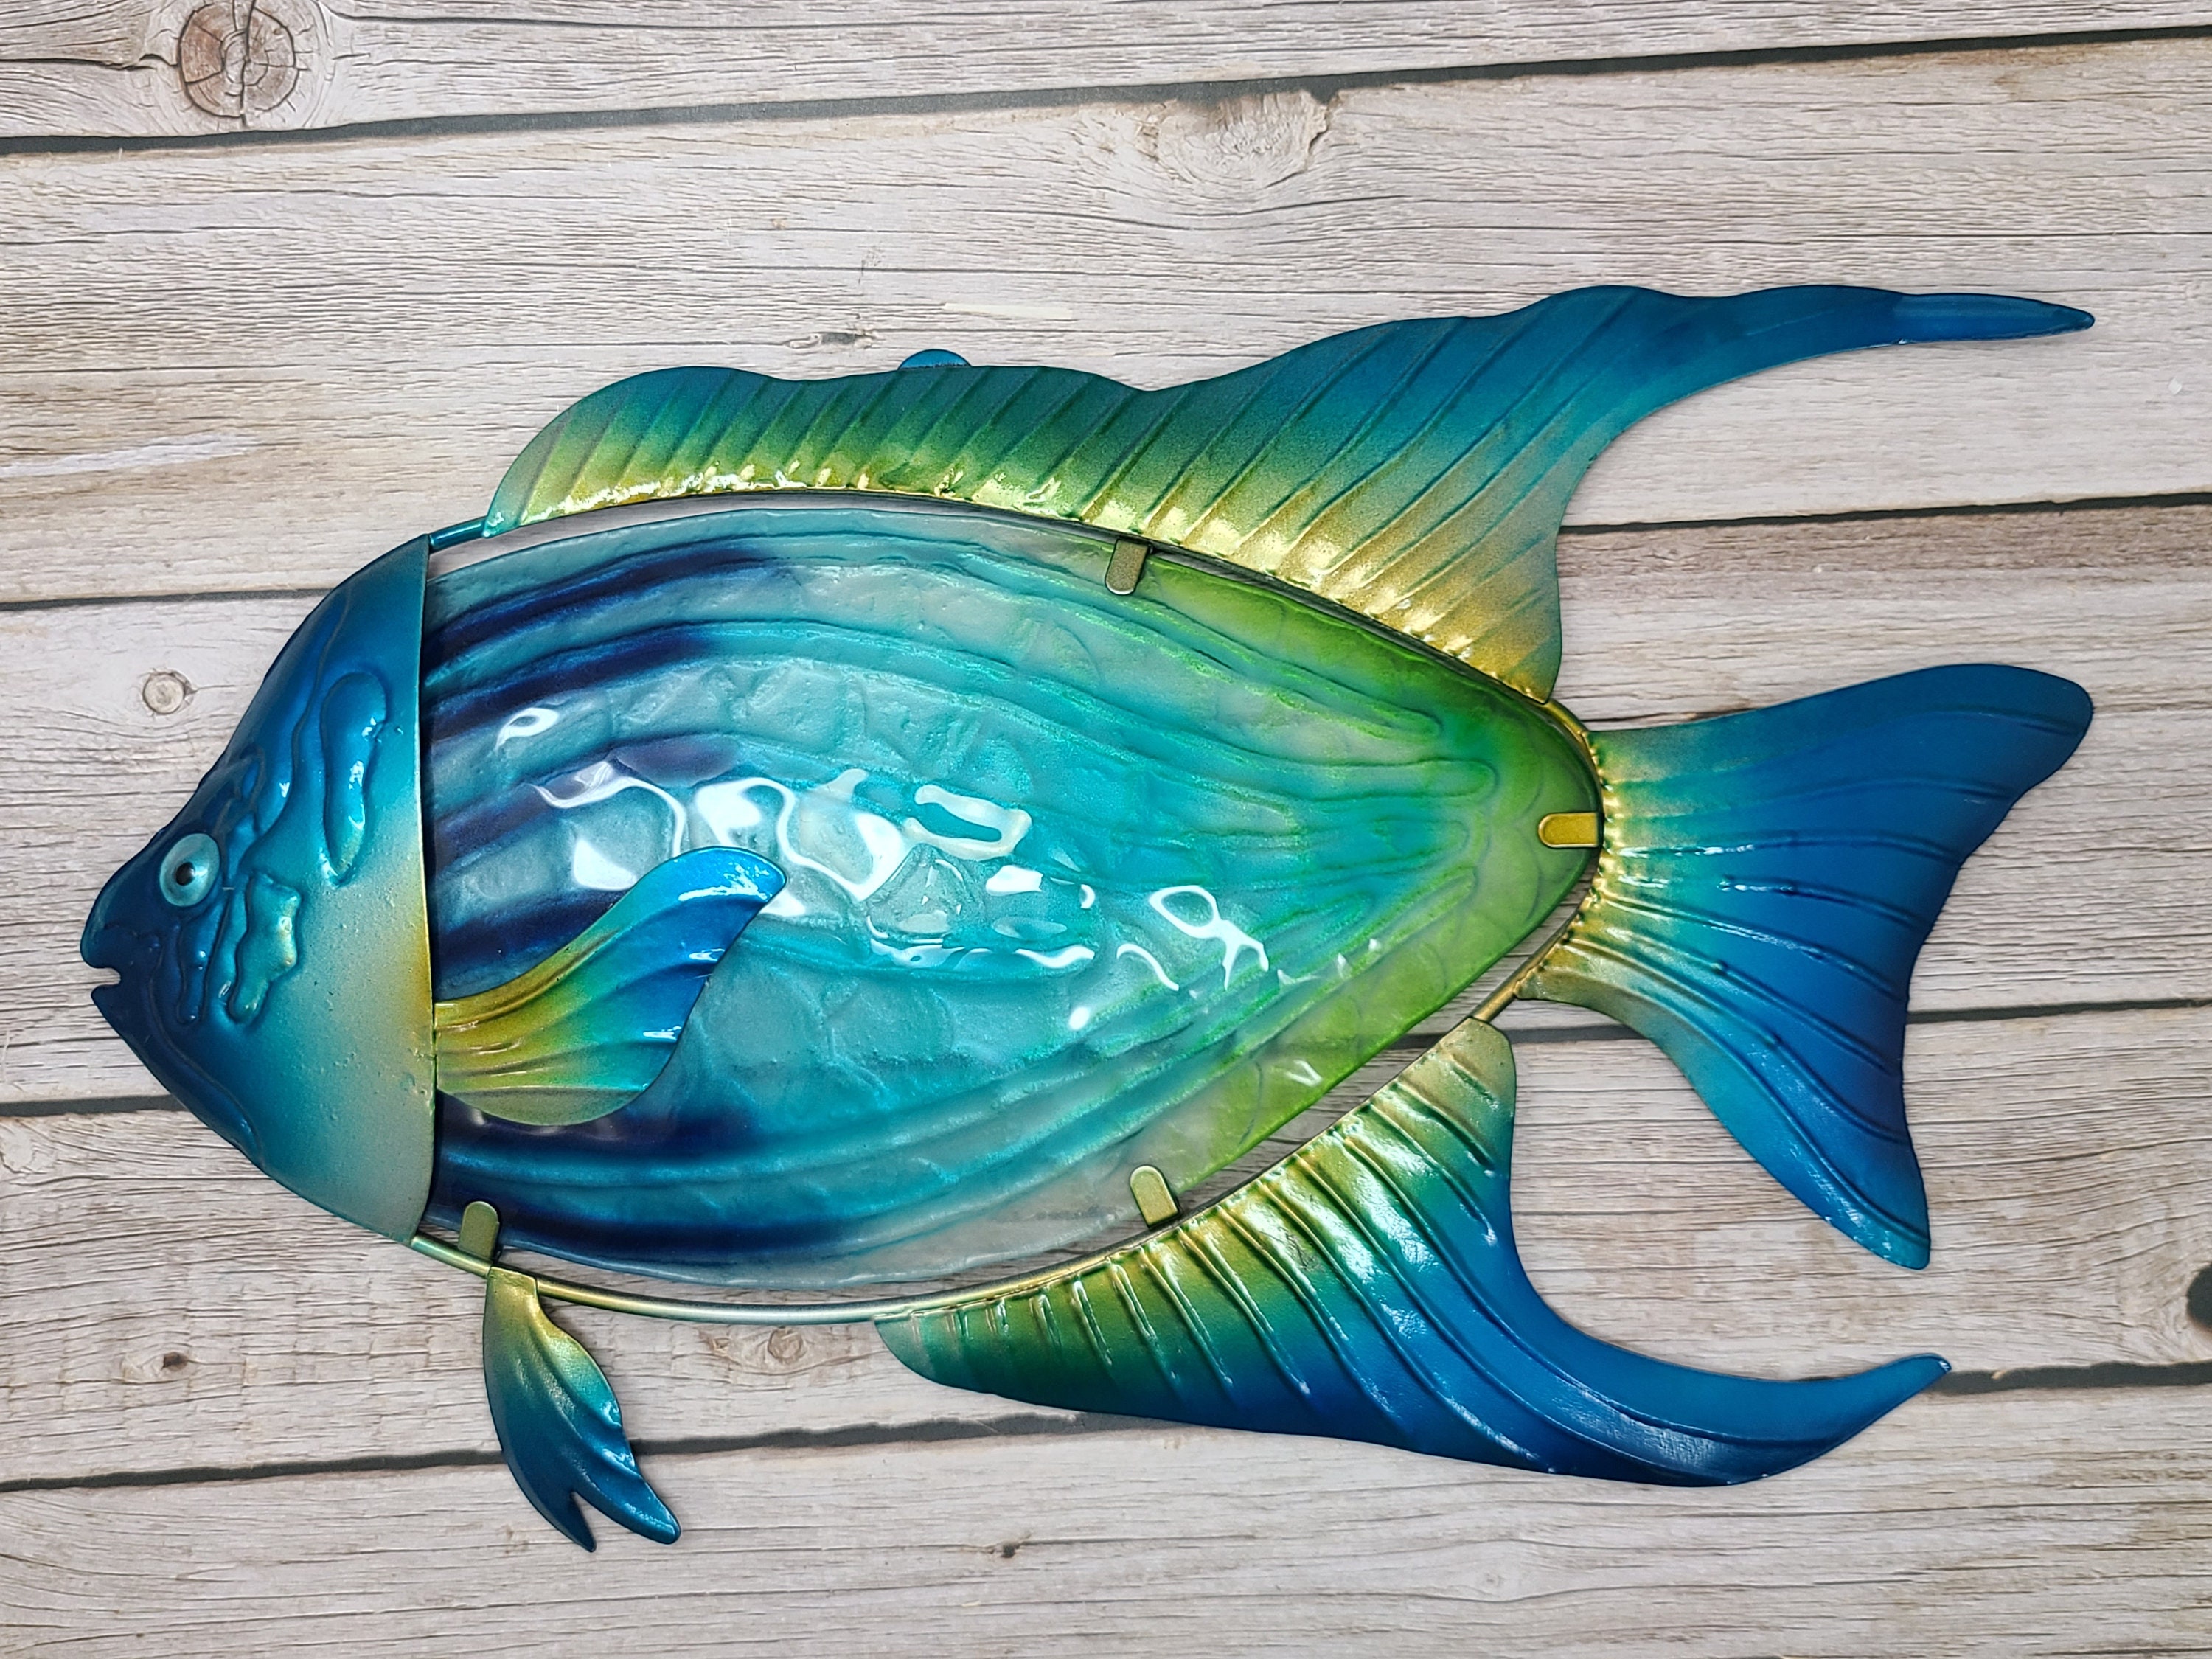 Fly Fishing Decor | Fishing Decor for Home | Metal Wall Art - Fish Wall  Decor Ornament Trout Fishing Scene Metal Wall Artwork Home Office  Decoration